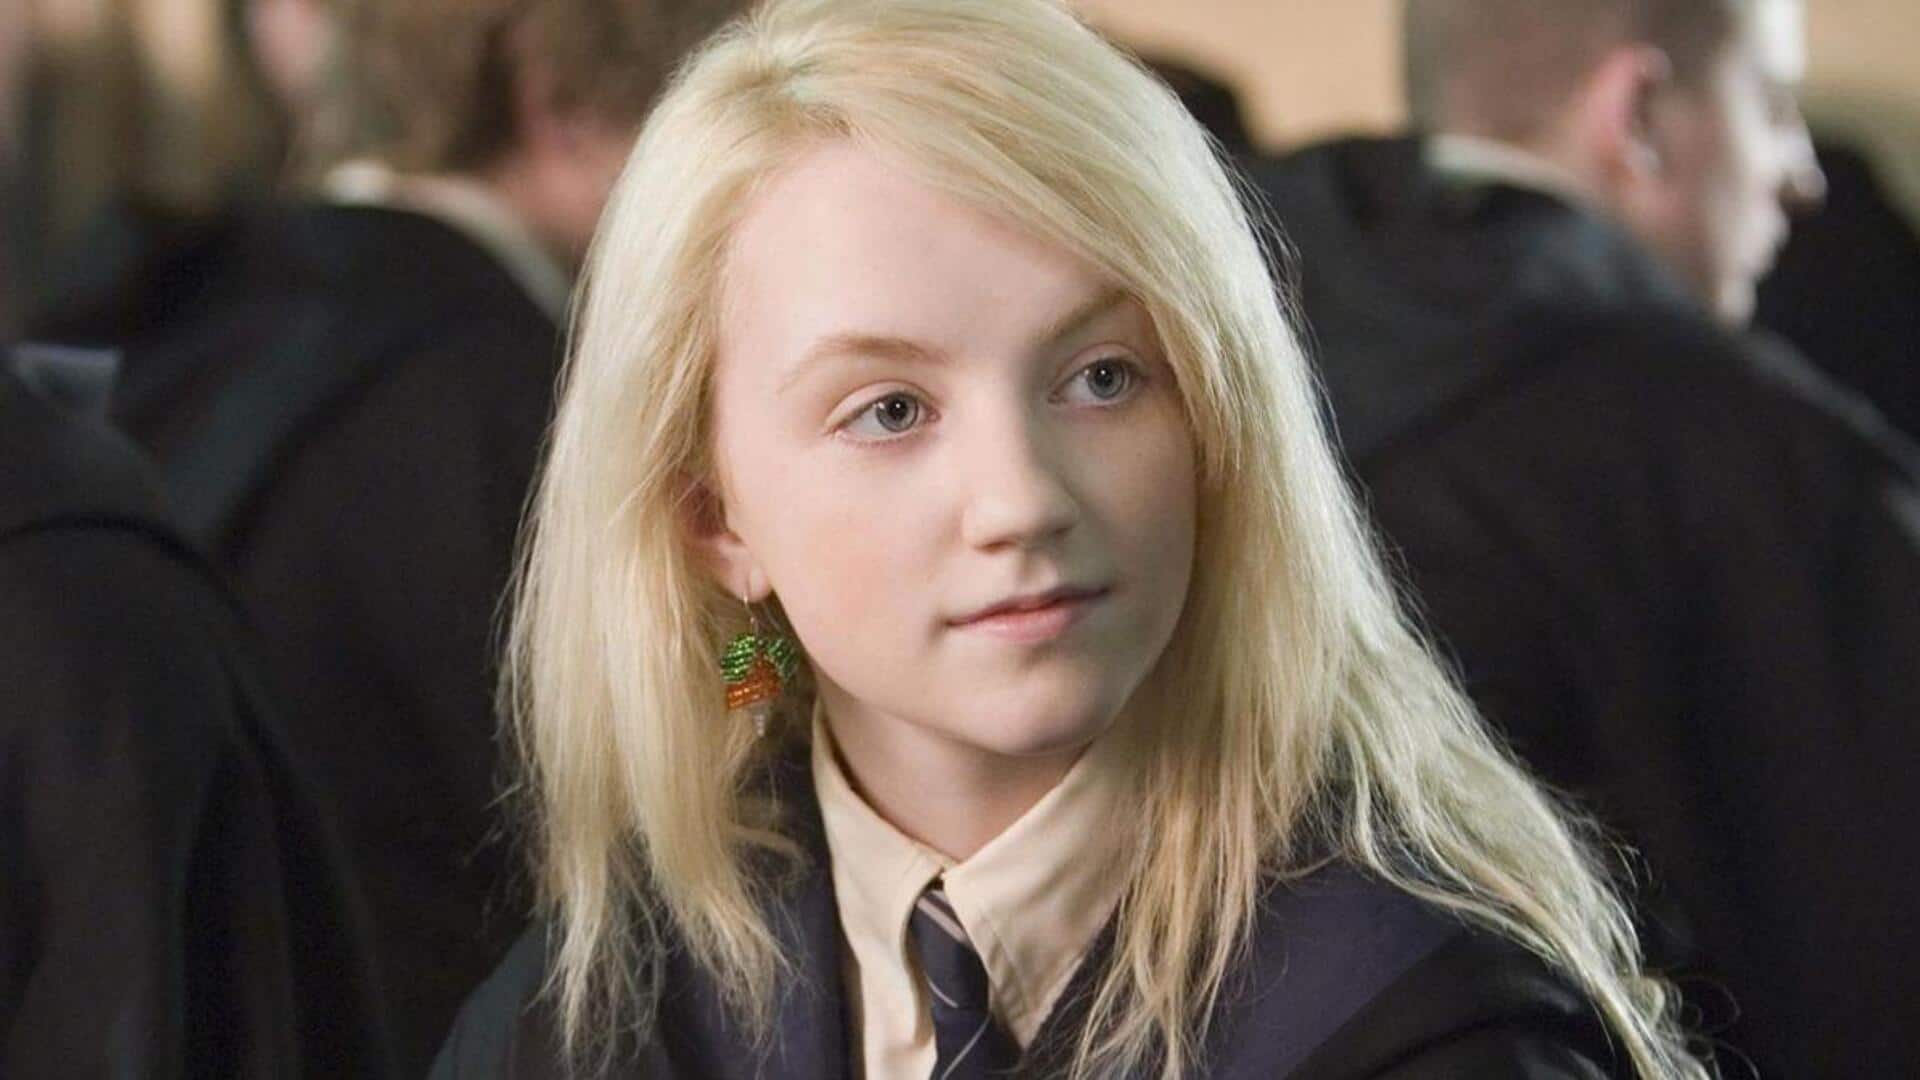 'Harry Potter' fame Evanna Lynch to lead 'dark, ominous story' 